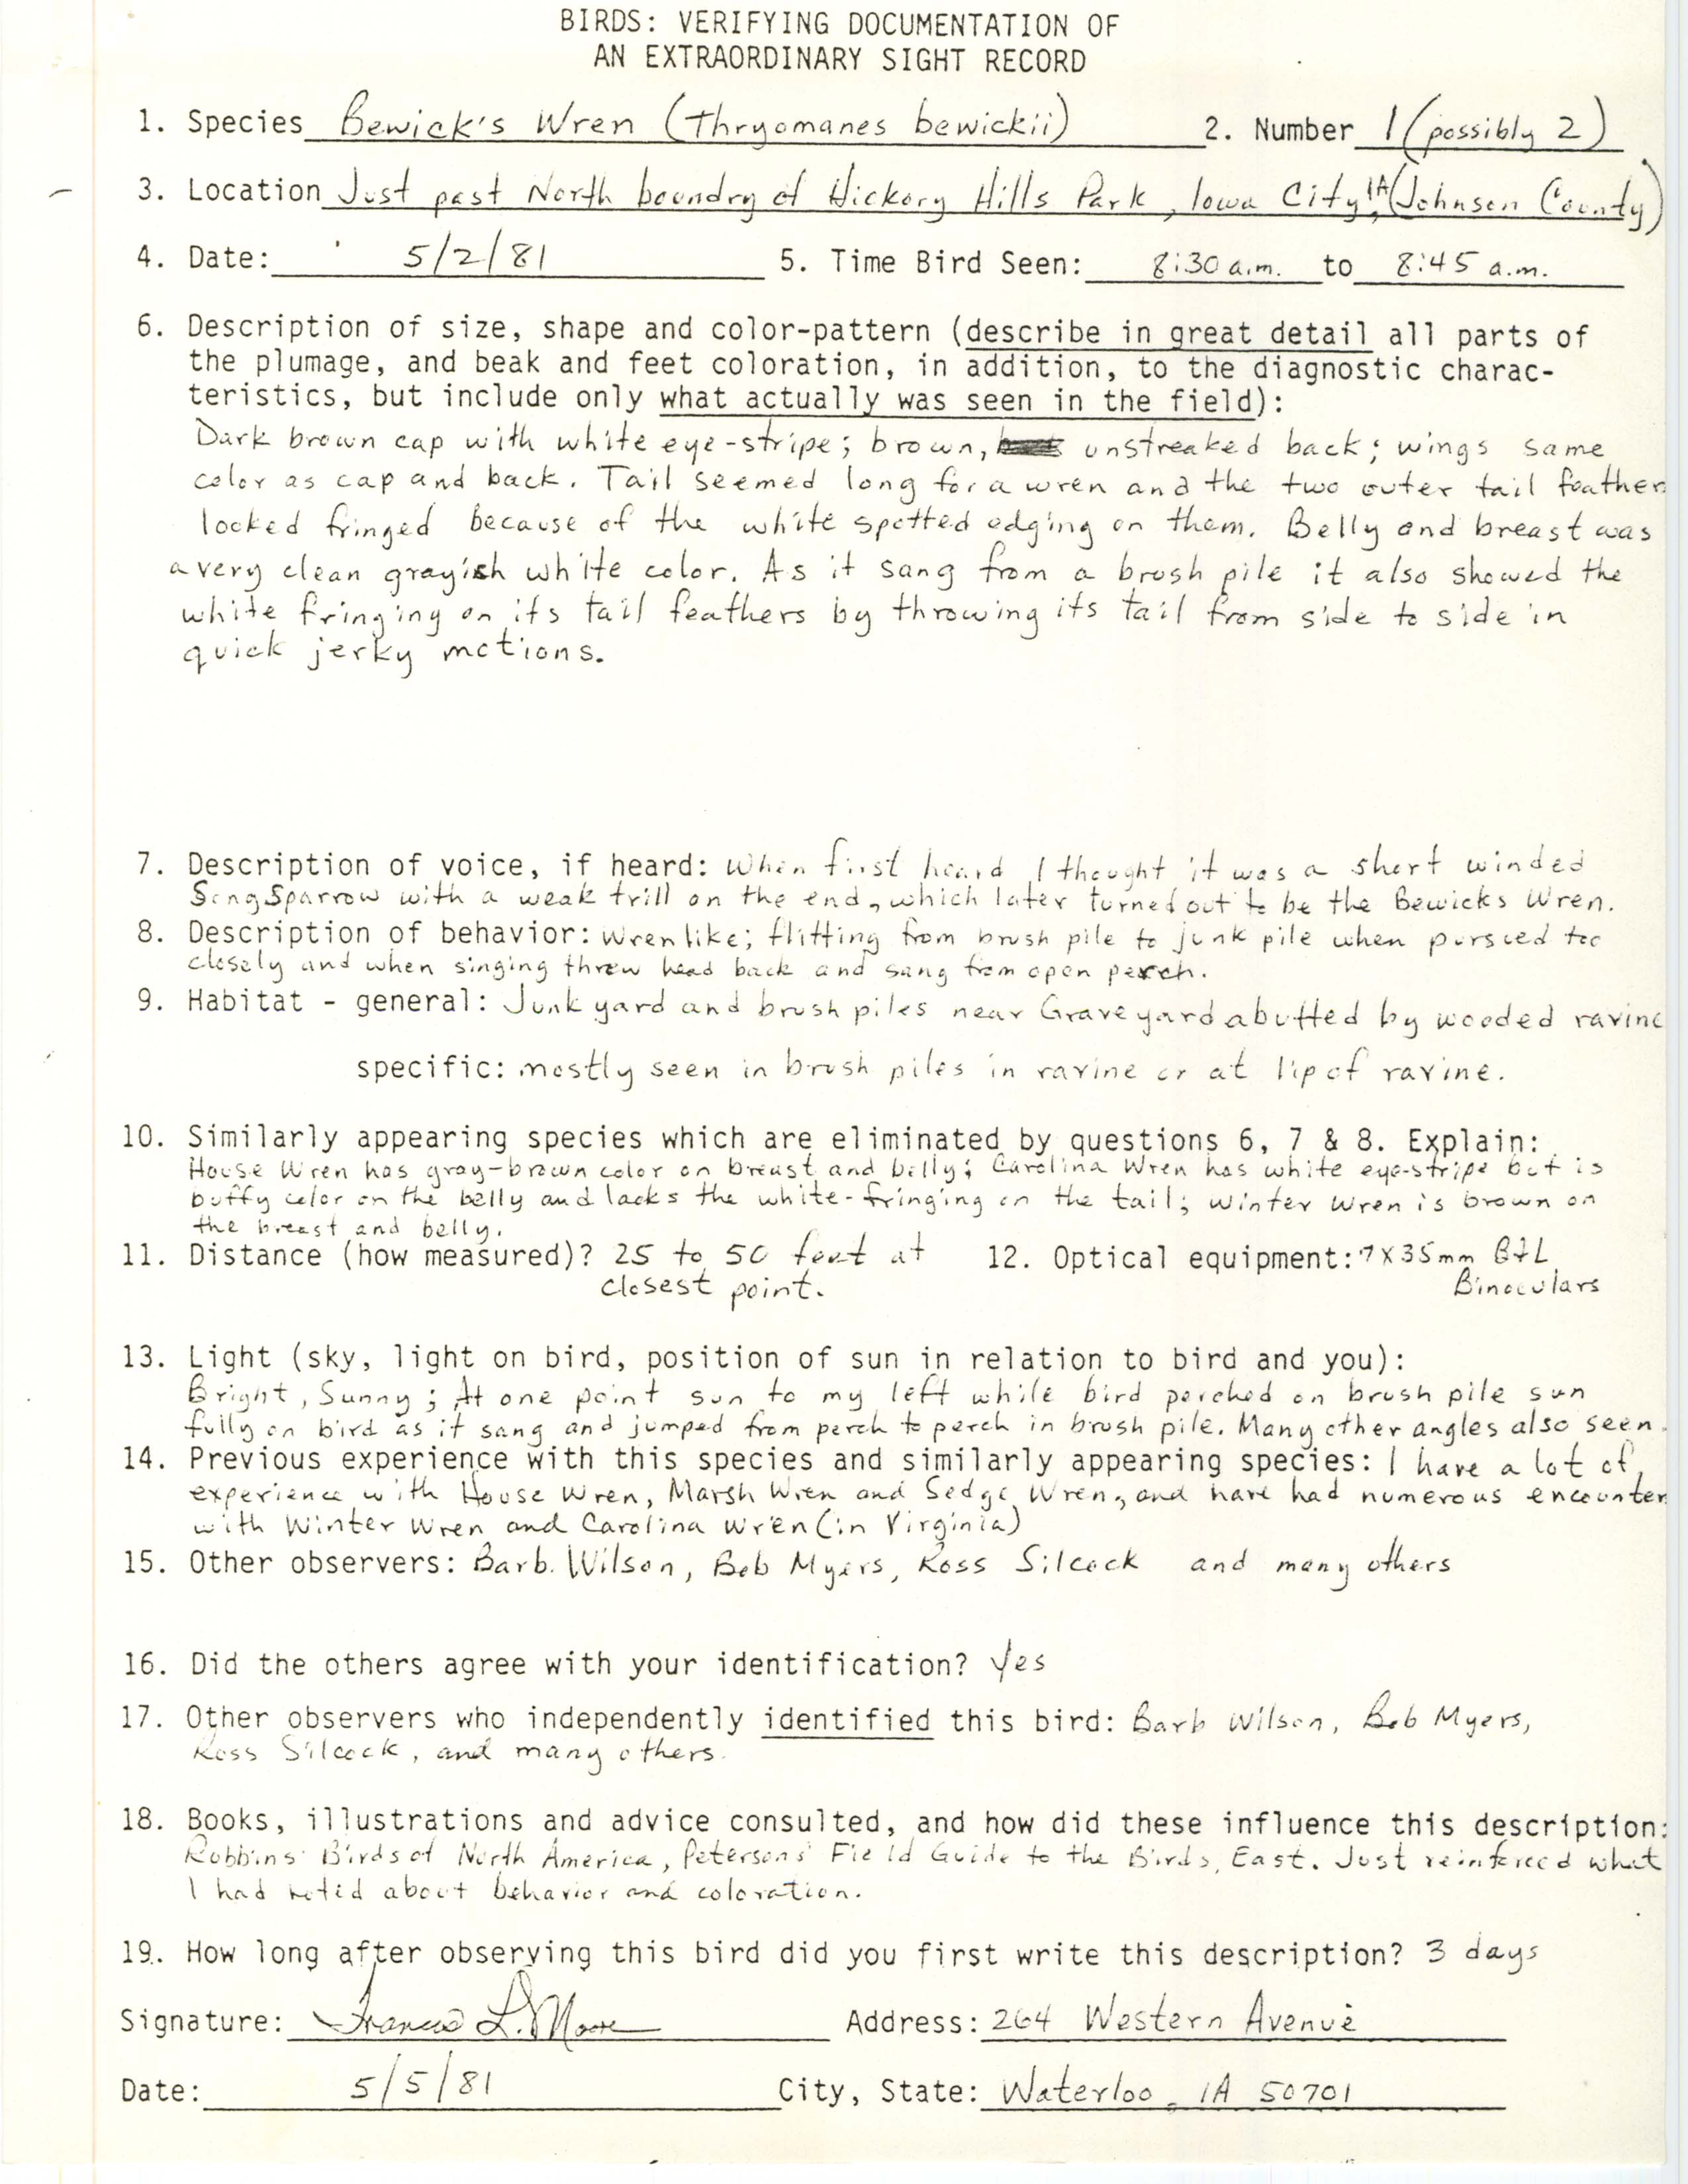 Rare bird documentation form for Bewick's Wren north of Hickory Hill Park in Iowa City, 1981